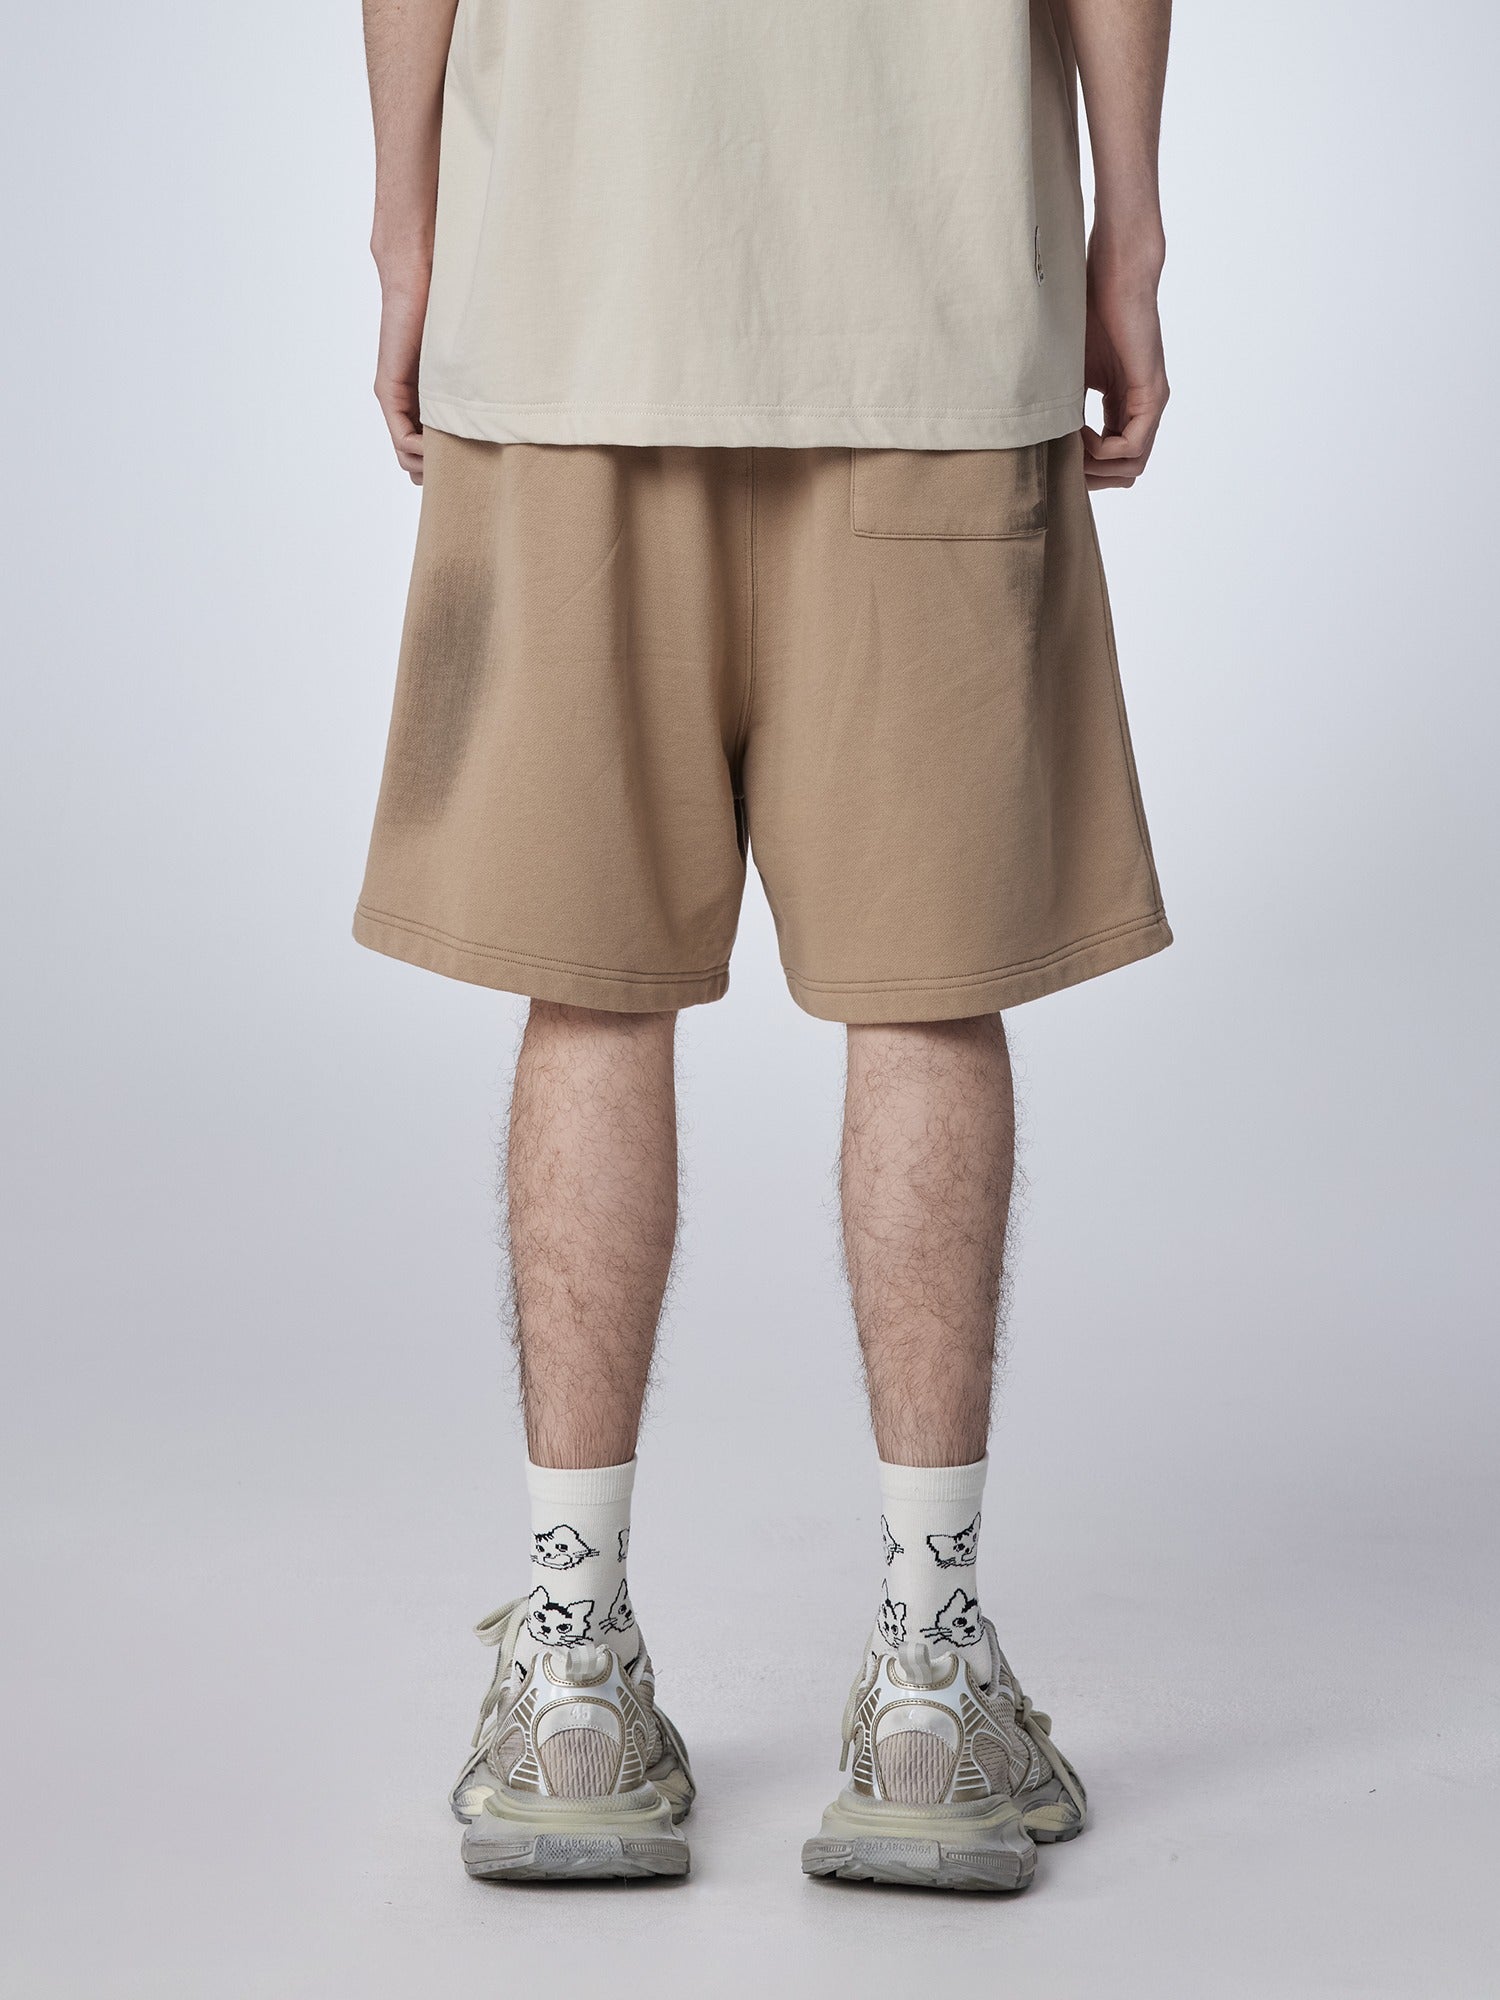 Men's summer shorts: Khaki with fun cat print. 100% cotton, relaxed fit, cropped length.